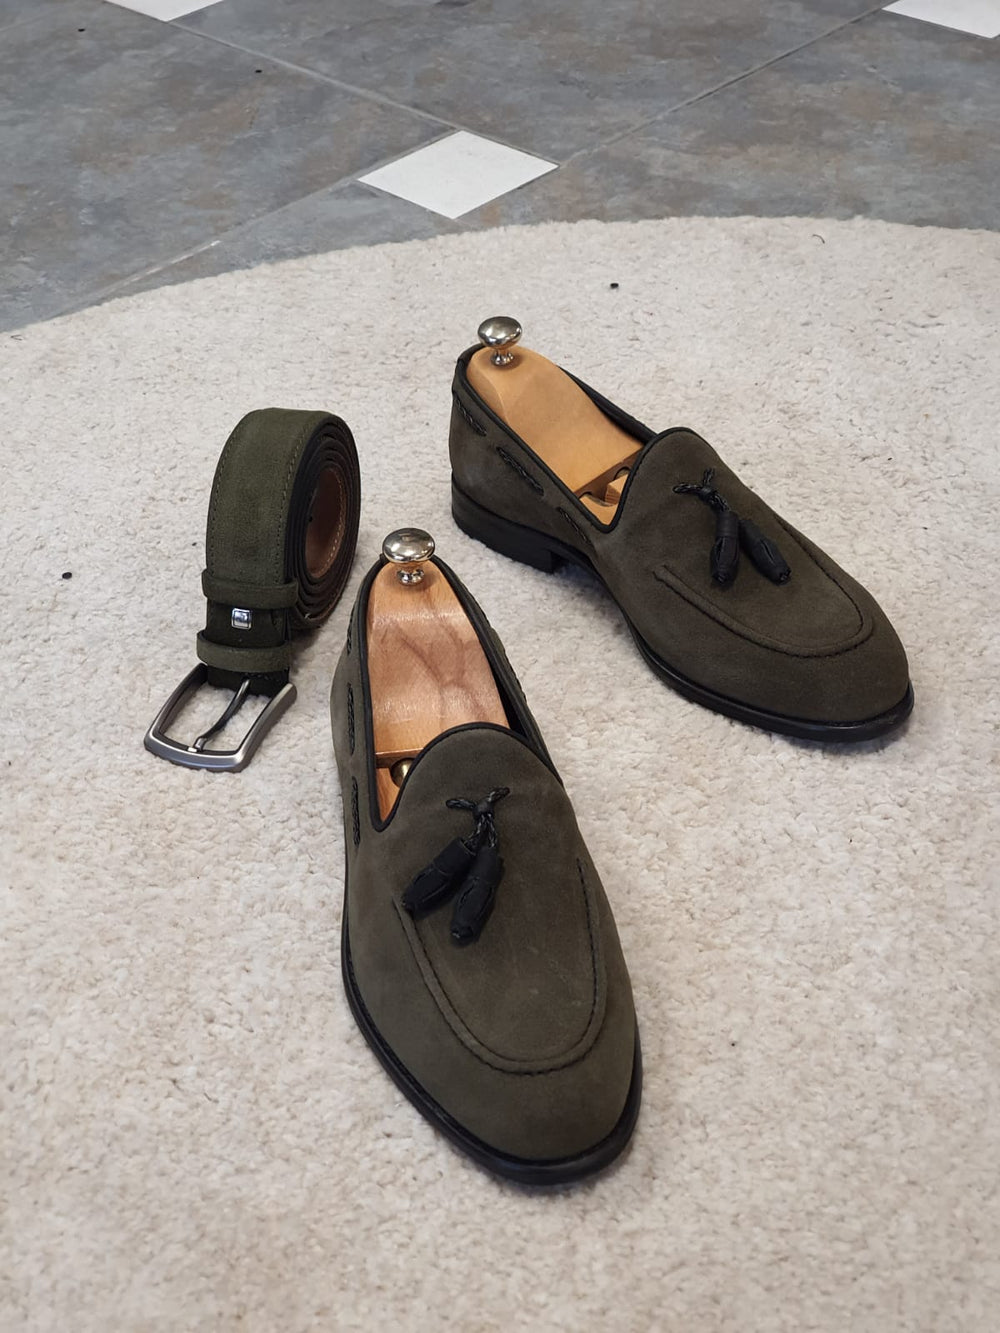 Vince MenStyleWith Special Edition Khaki Suede Shoes - MenStyleWith